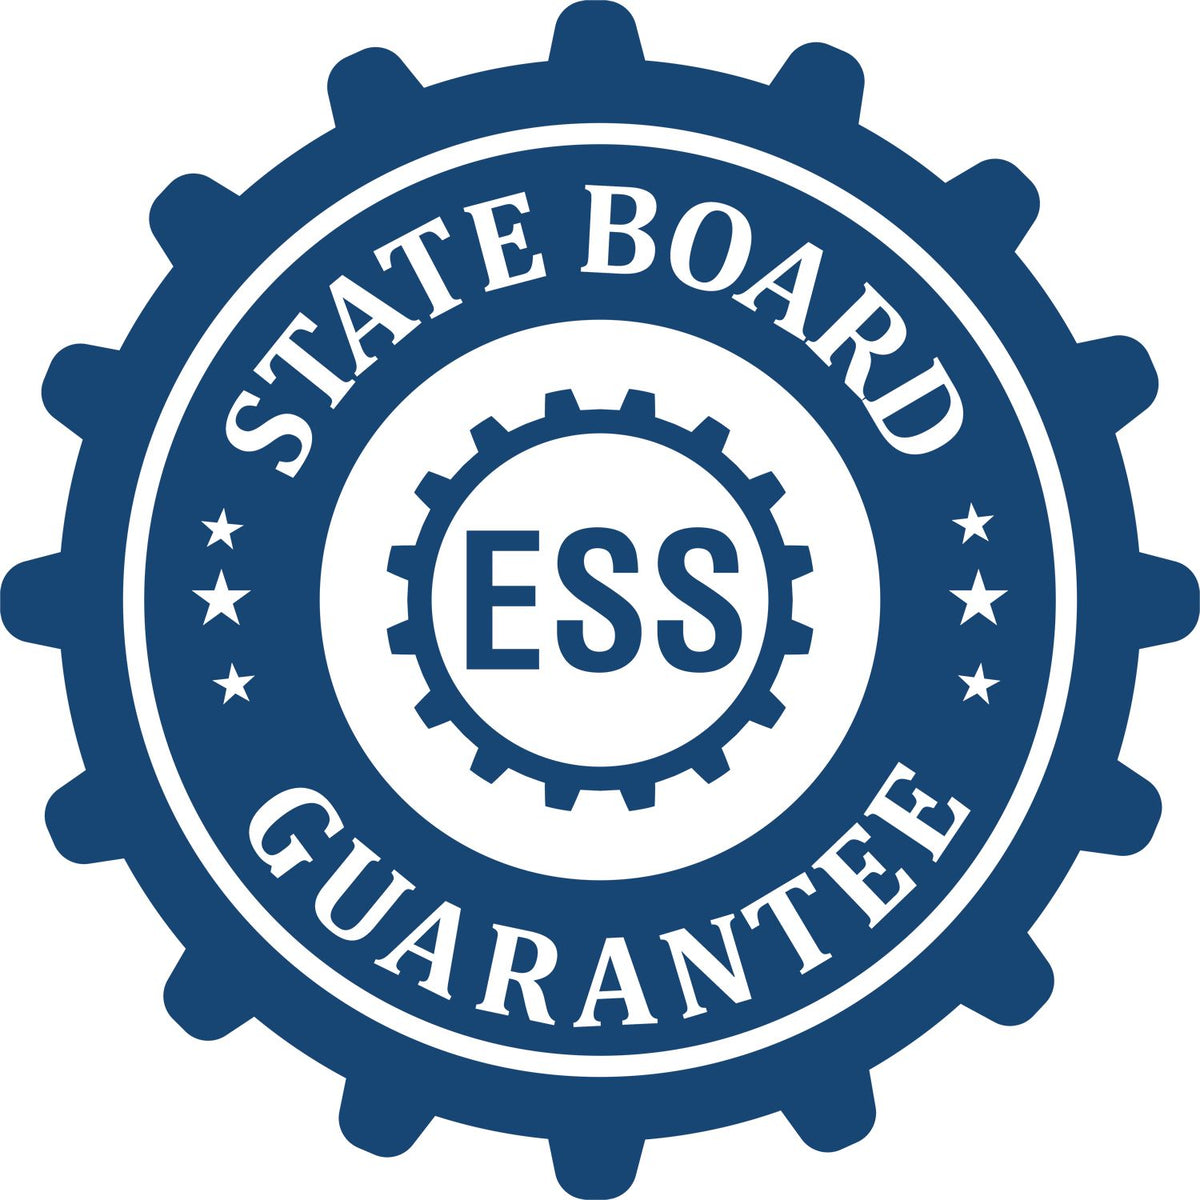 An emblem in a gear shape illustrating a state board guarantee for the State of South Dakota Long Reach Architectural Embossing Seal product.